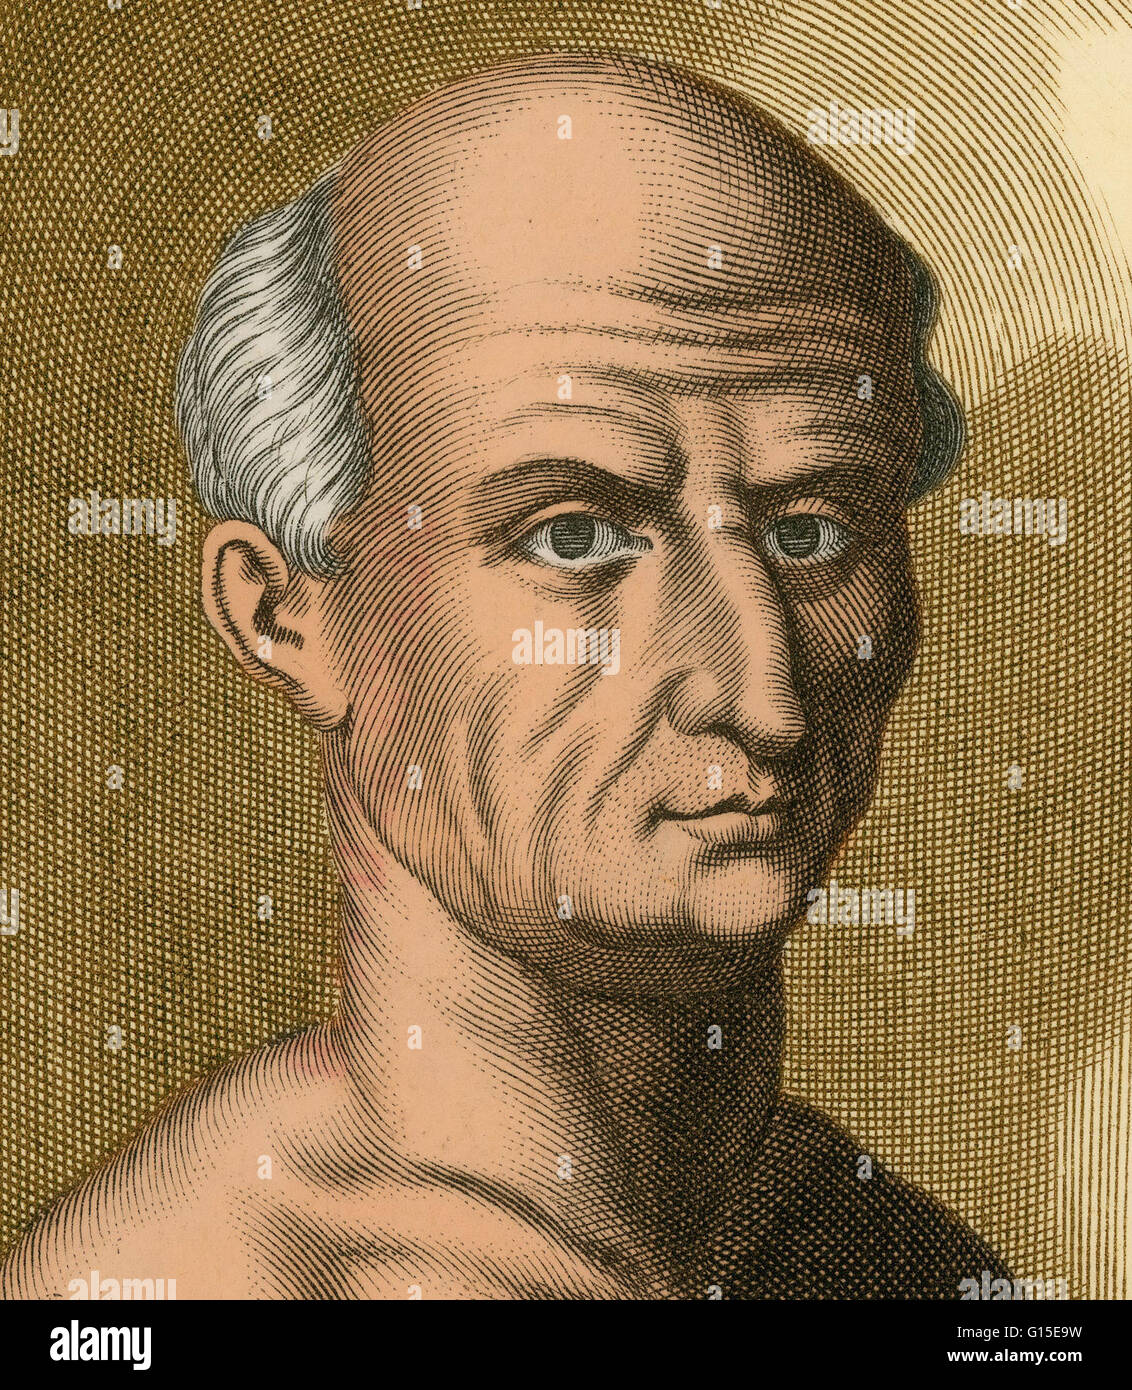 Marcus Tullius Cicero, 106-43 BC, was a Roman philosopher, statesman, lawyer, political theorist, Roman constitutionalist and is widely considered one of Rome's greatest orators and prose stylists. He introduced the Romans to the chief schools of Greek ph Stock Photo